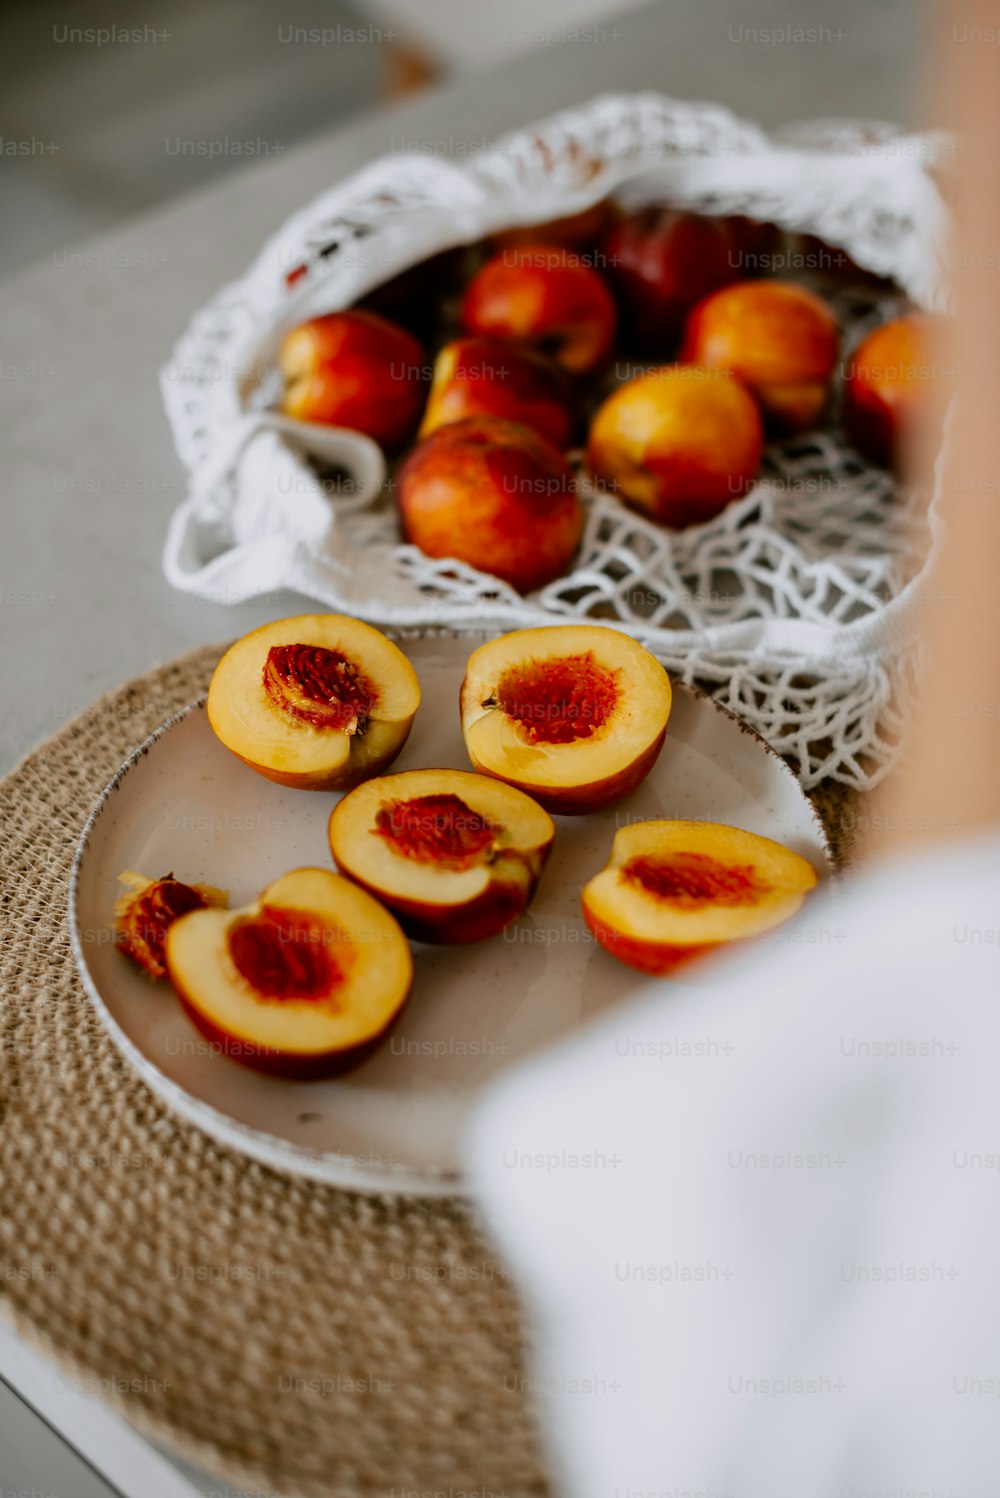 a plate of sliced peaches on a table